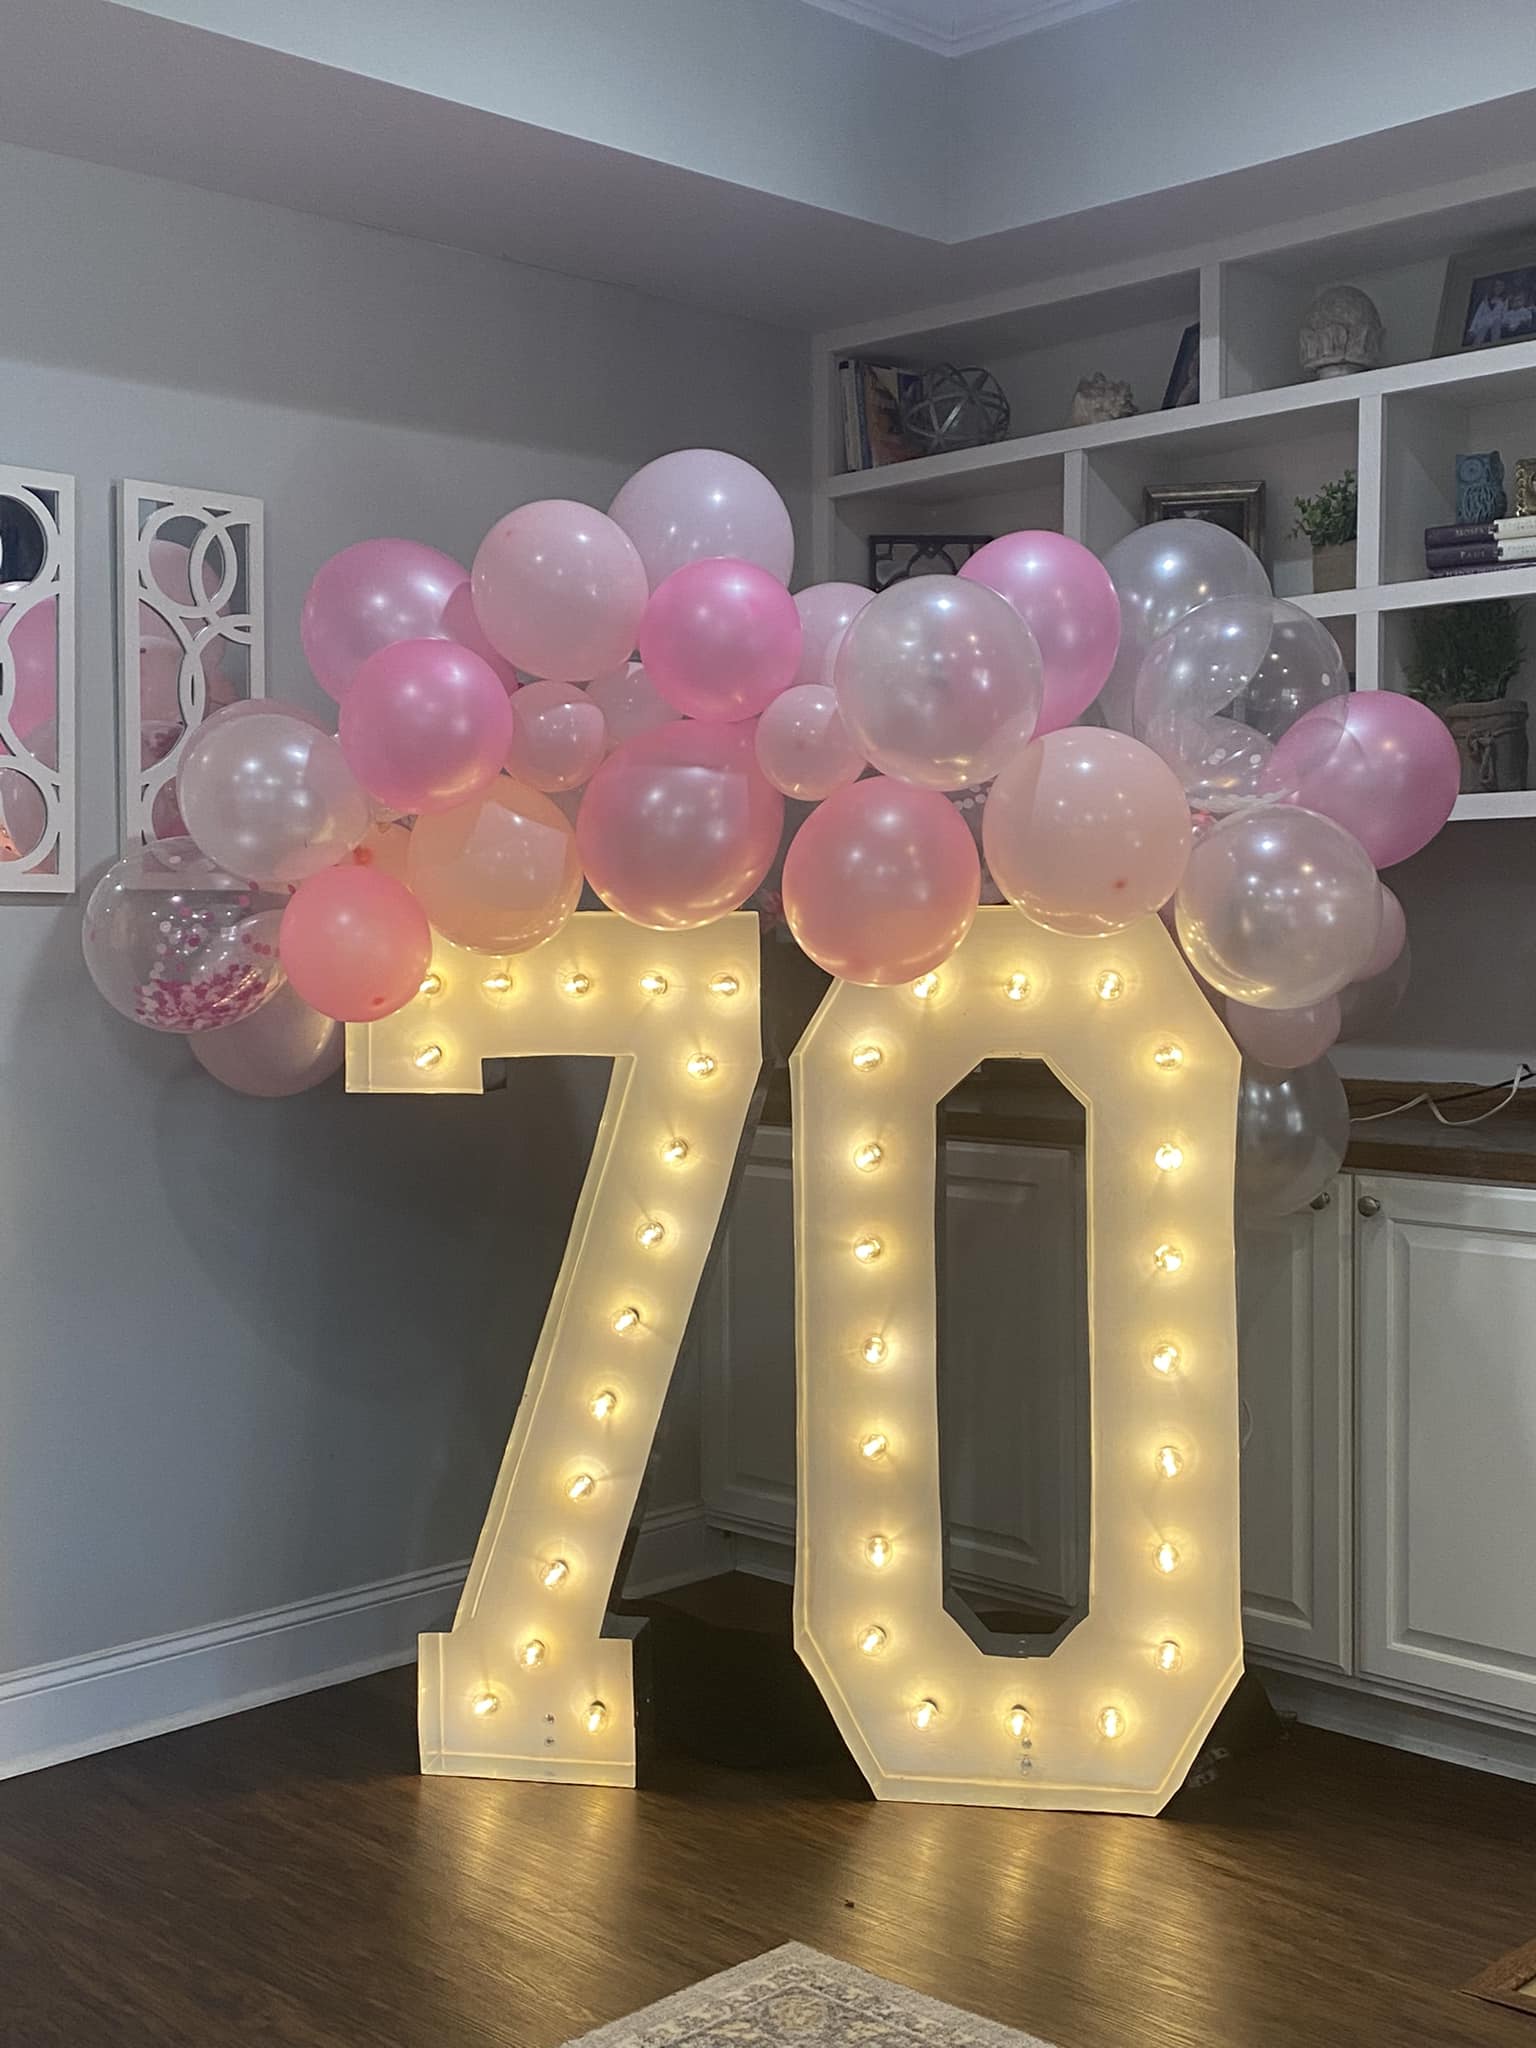 Huntsville Glow and Marquee Letters in North Alabama: All standard letters and numbers are an impressive 4' tall with classic toppers such as "THE" and "MR&MRS" that stand 2' tall.